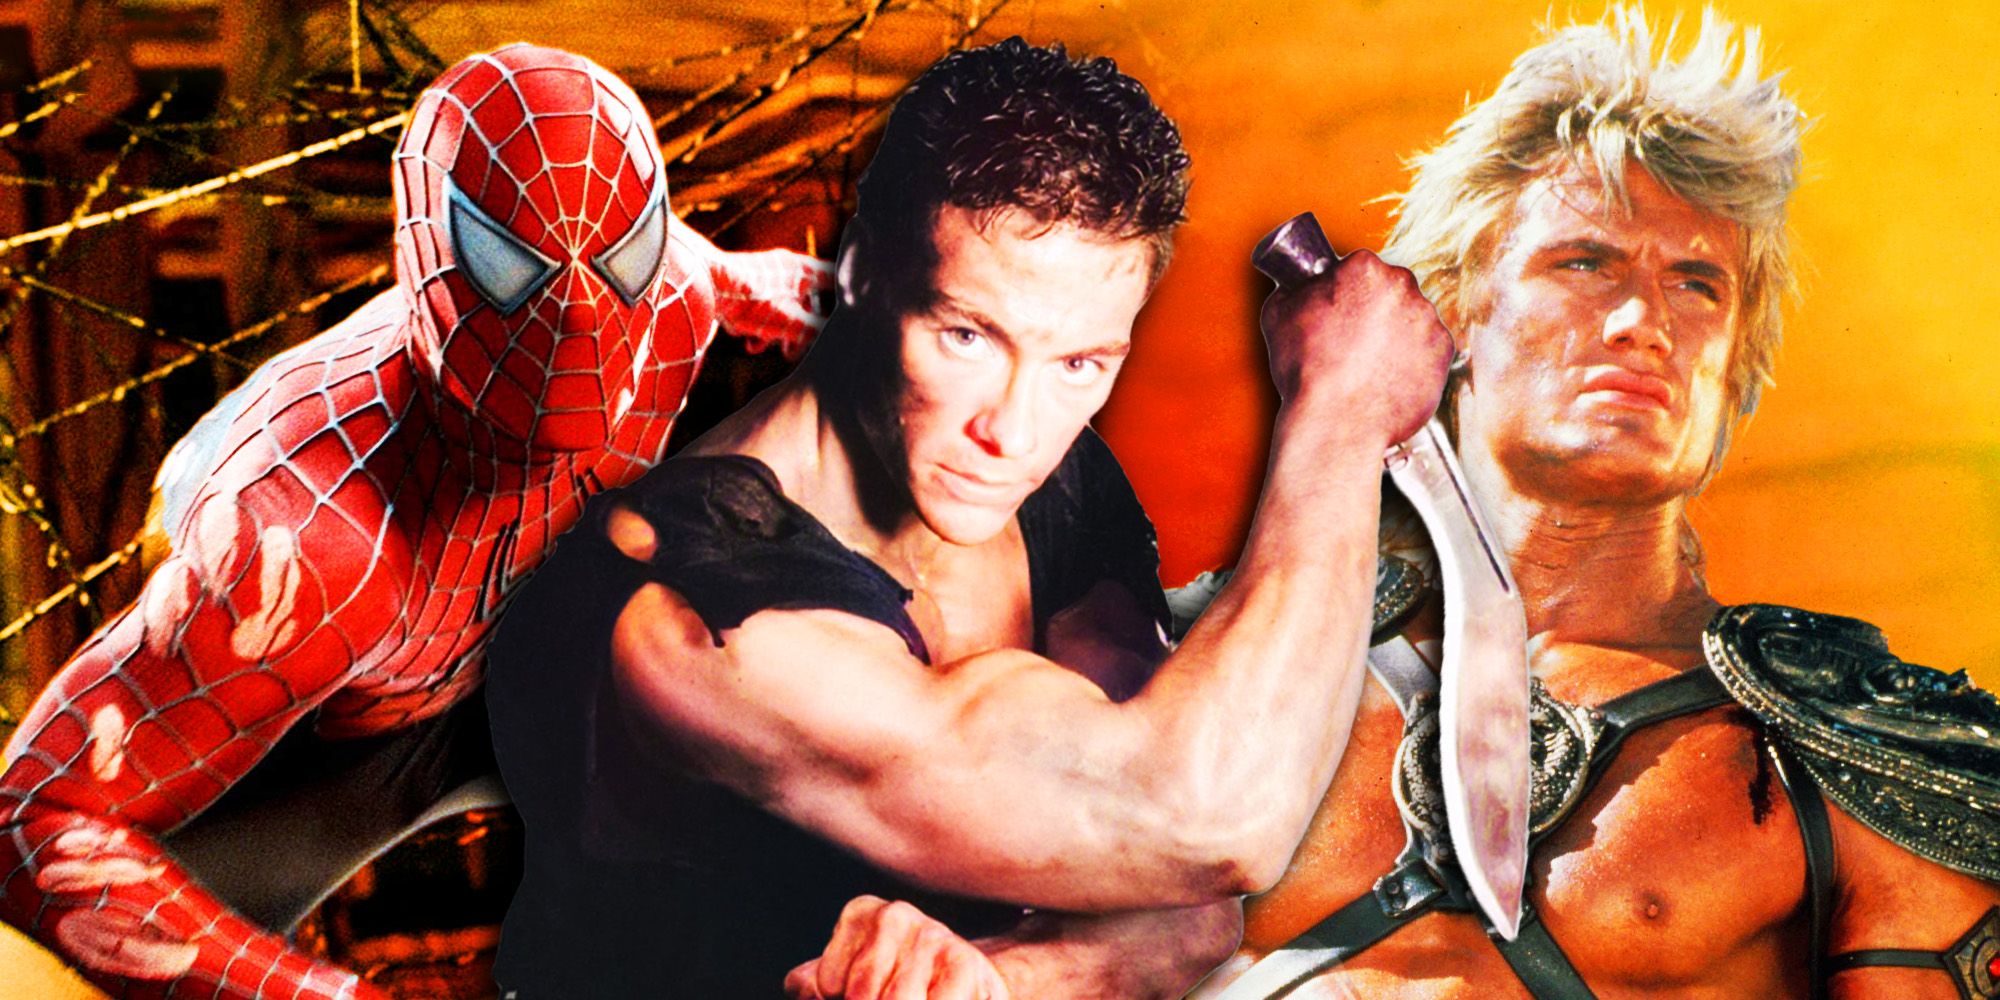 Jean-Claude Van Damme in Cyborg as the central focus, with Spider-Man and He-Man